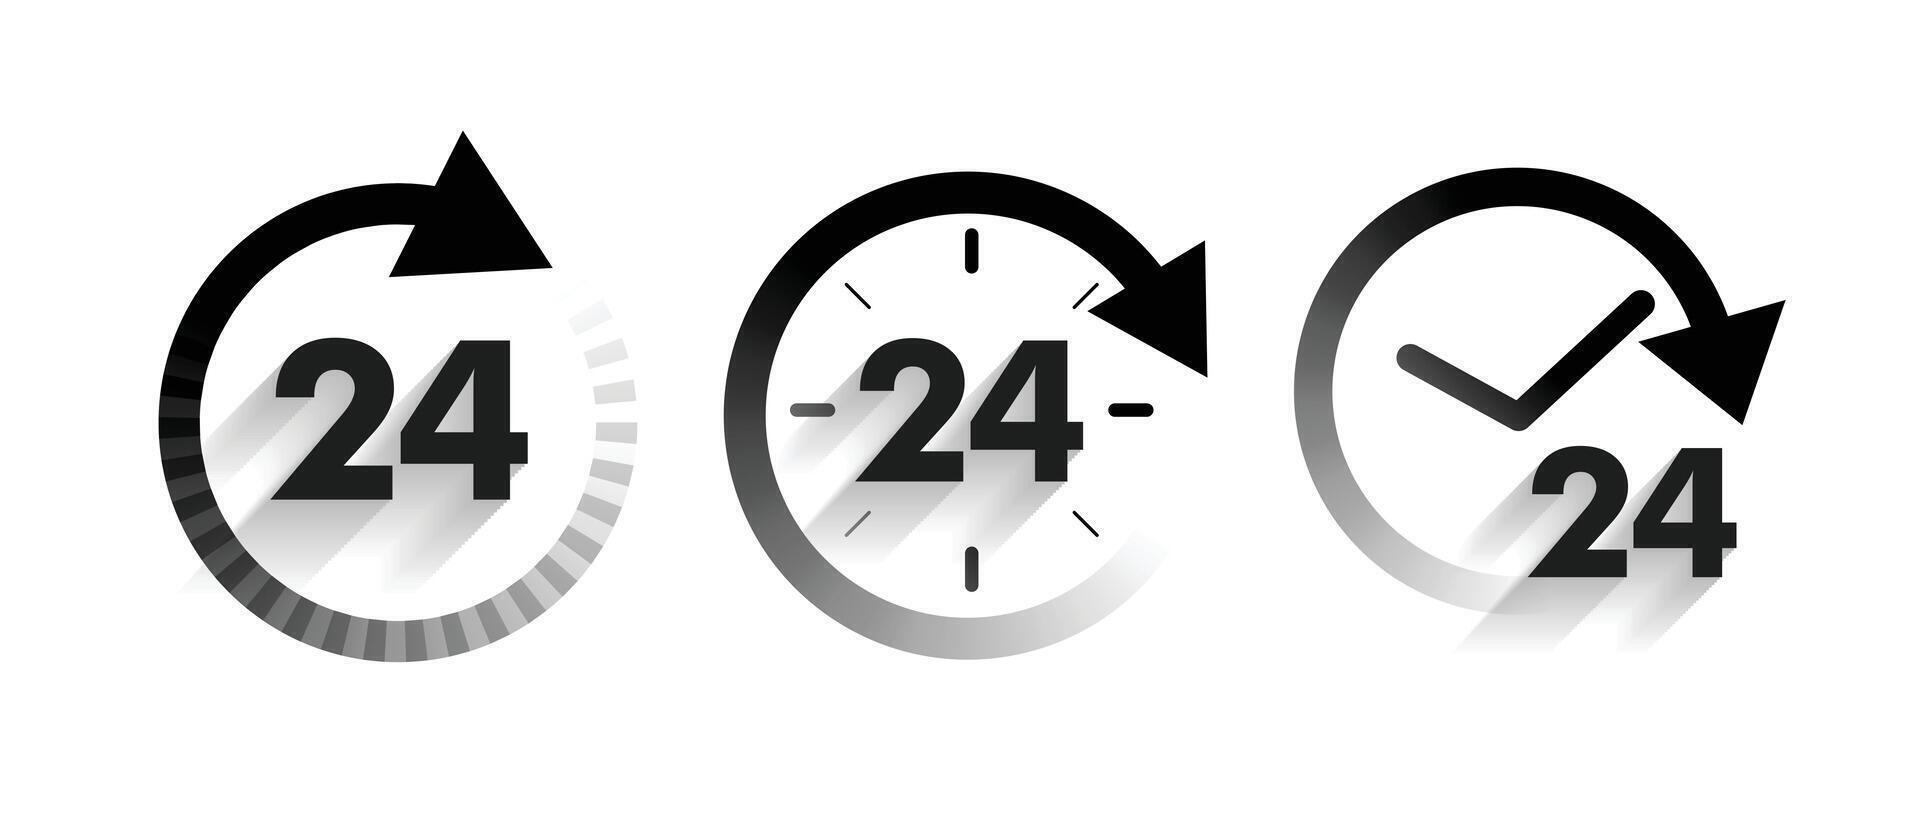 24 hours service a day icons set in arrow style vector